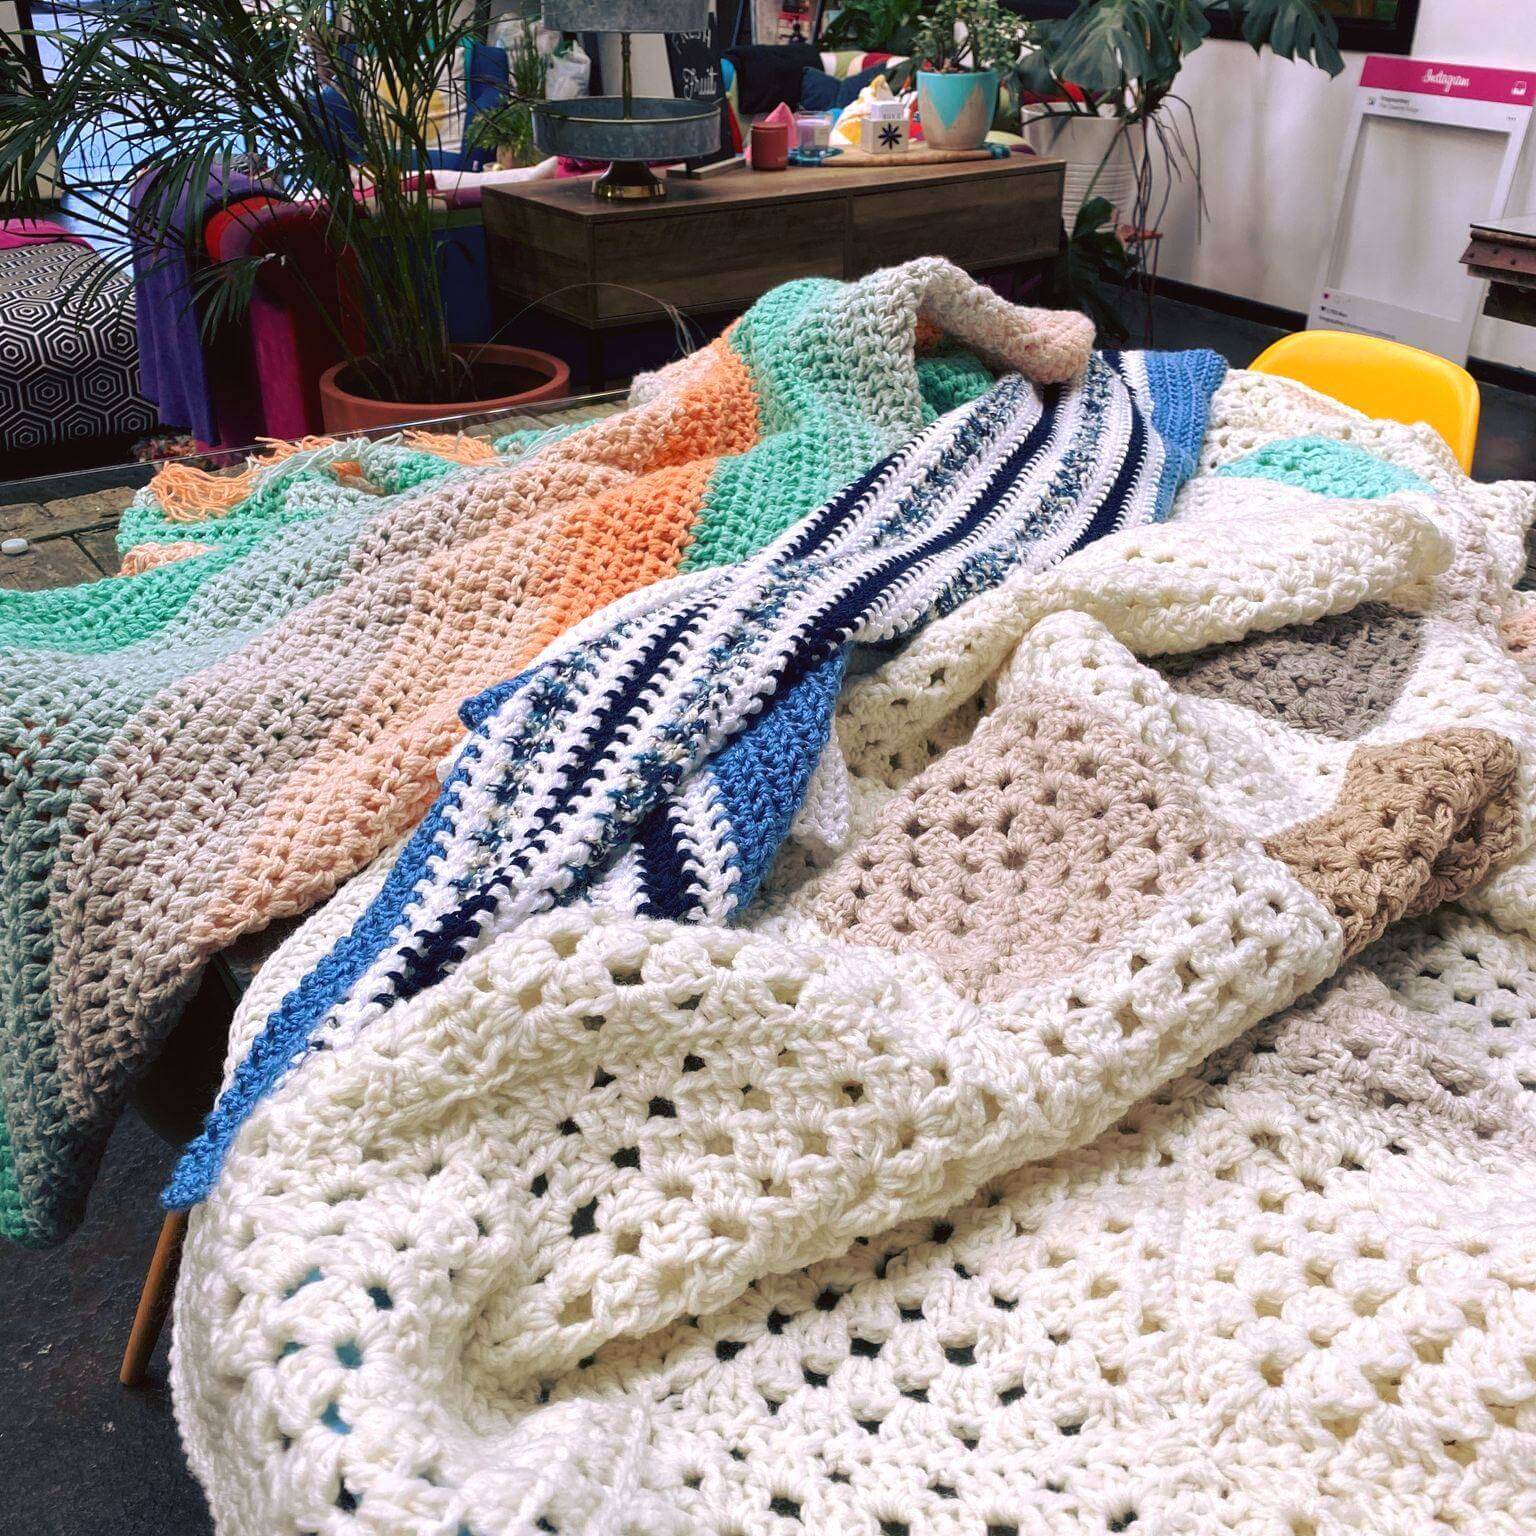 Beautiful crocheted blankets for the TOTS Blanket Challenge at The Creative Fringe Penrith